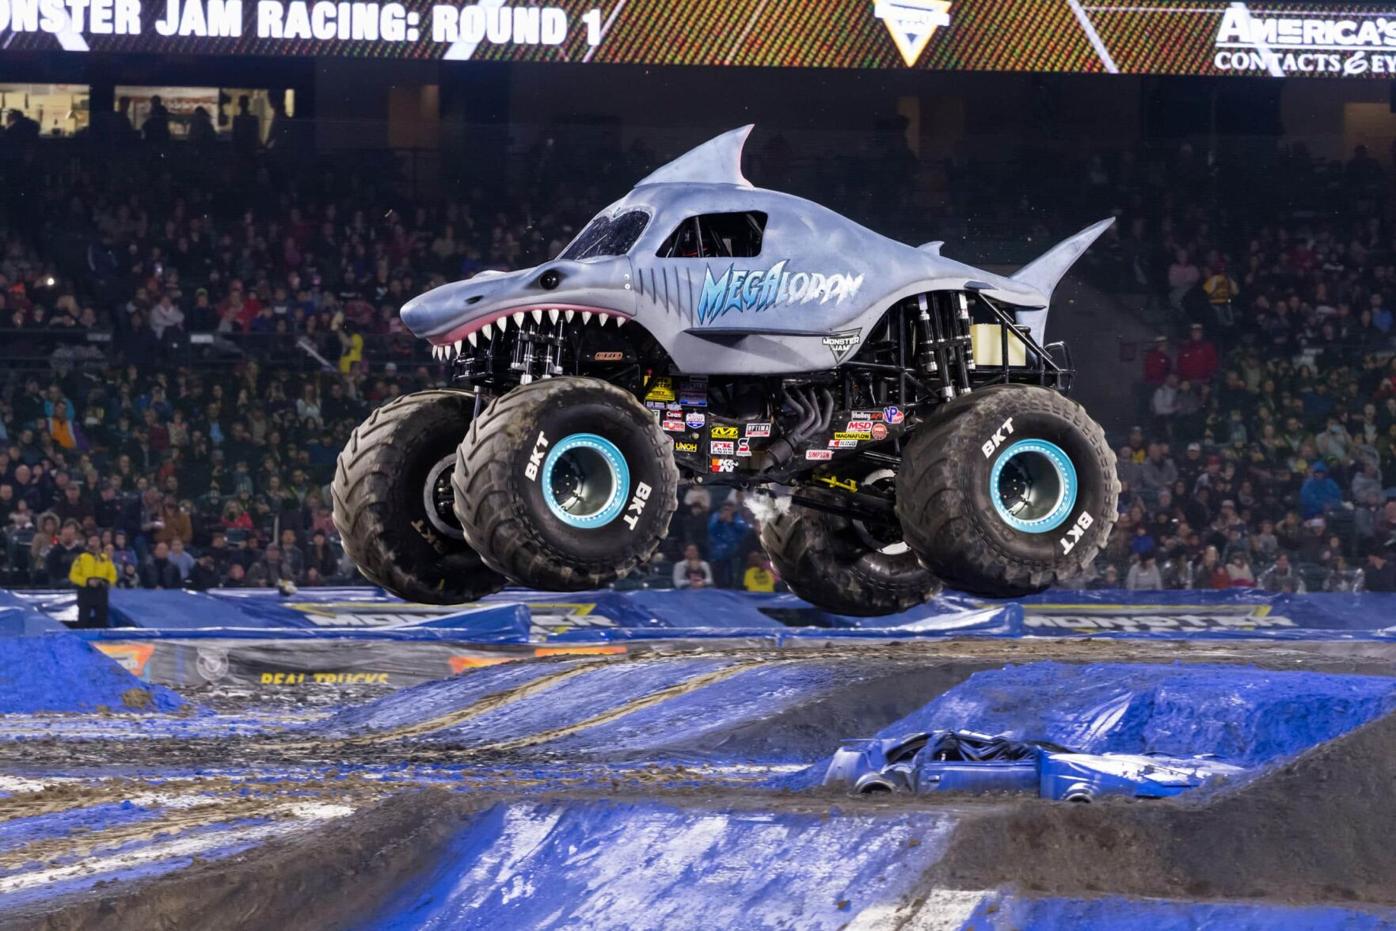 Monster Truck race battle::Appstore for Android